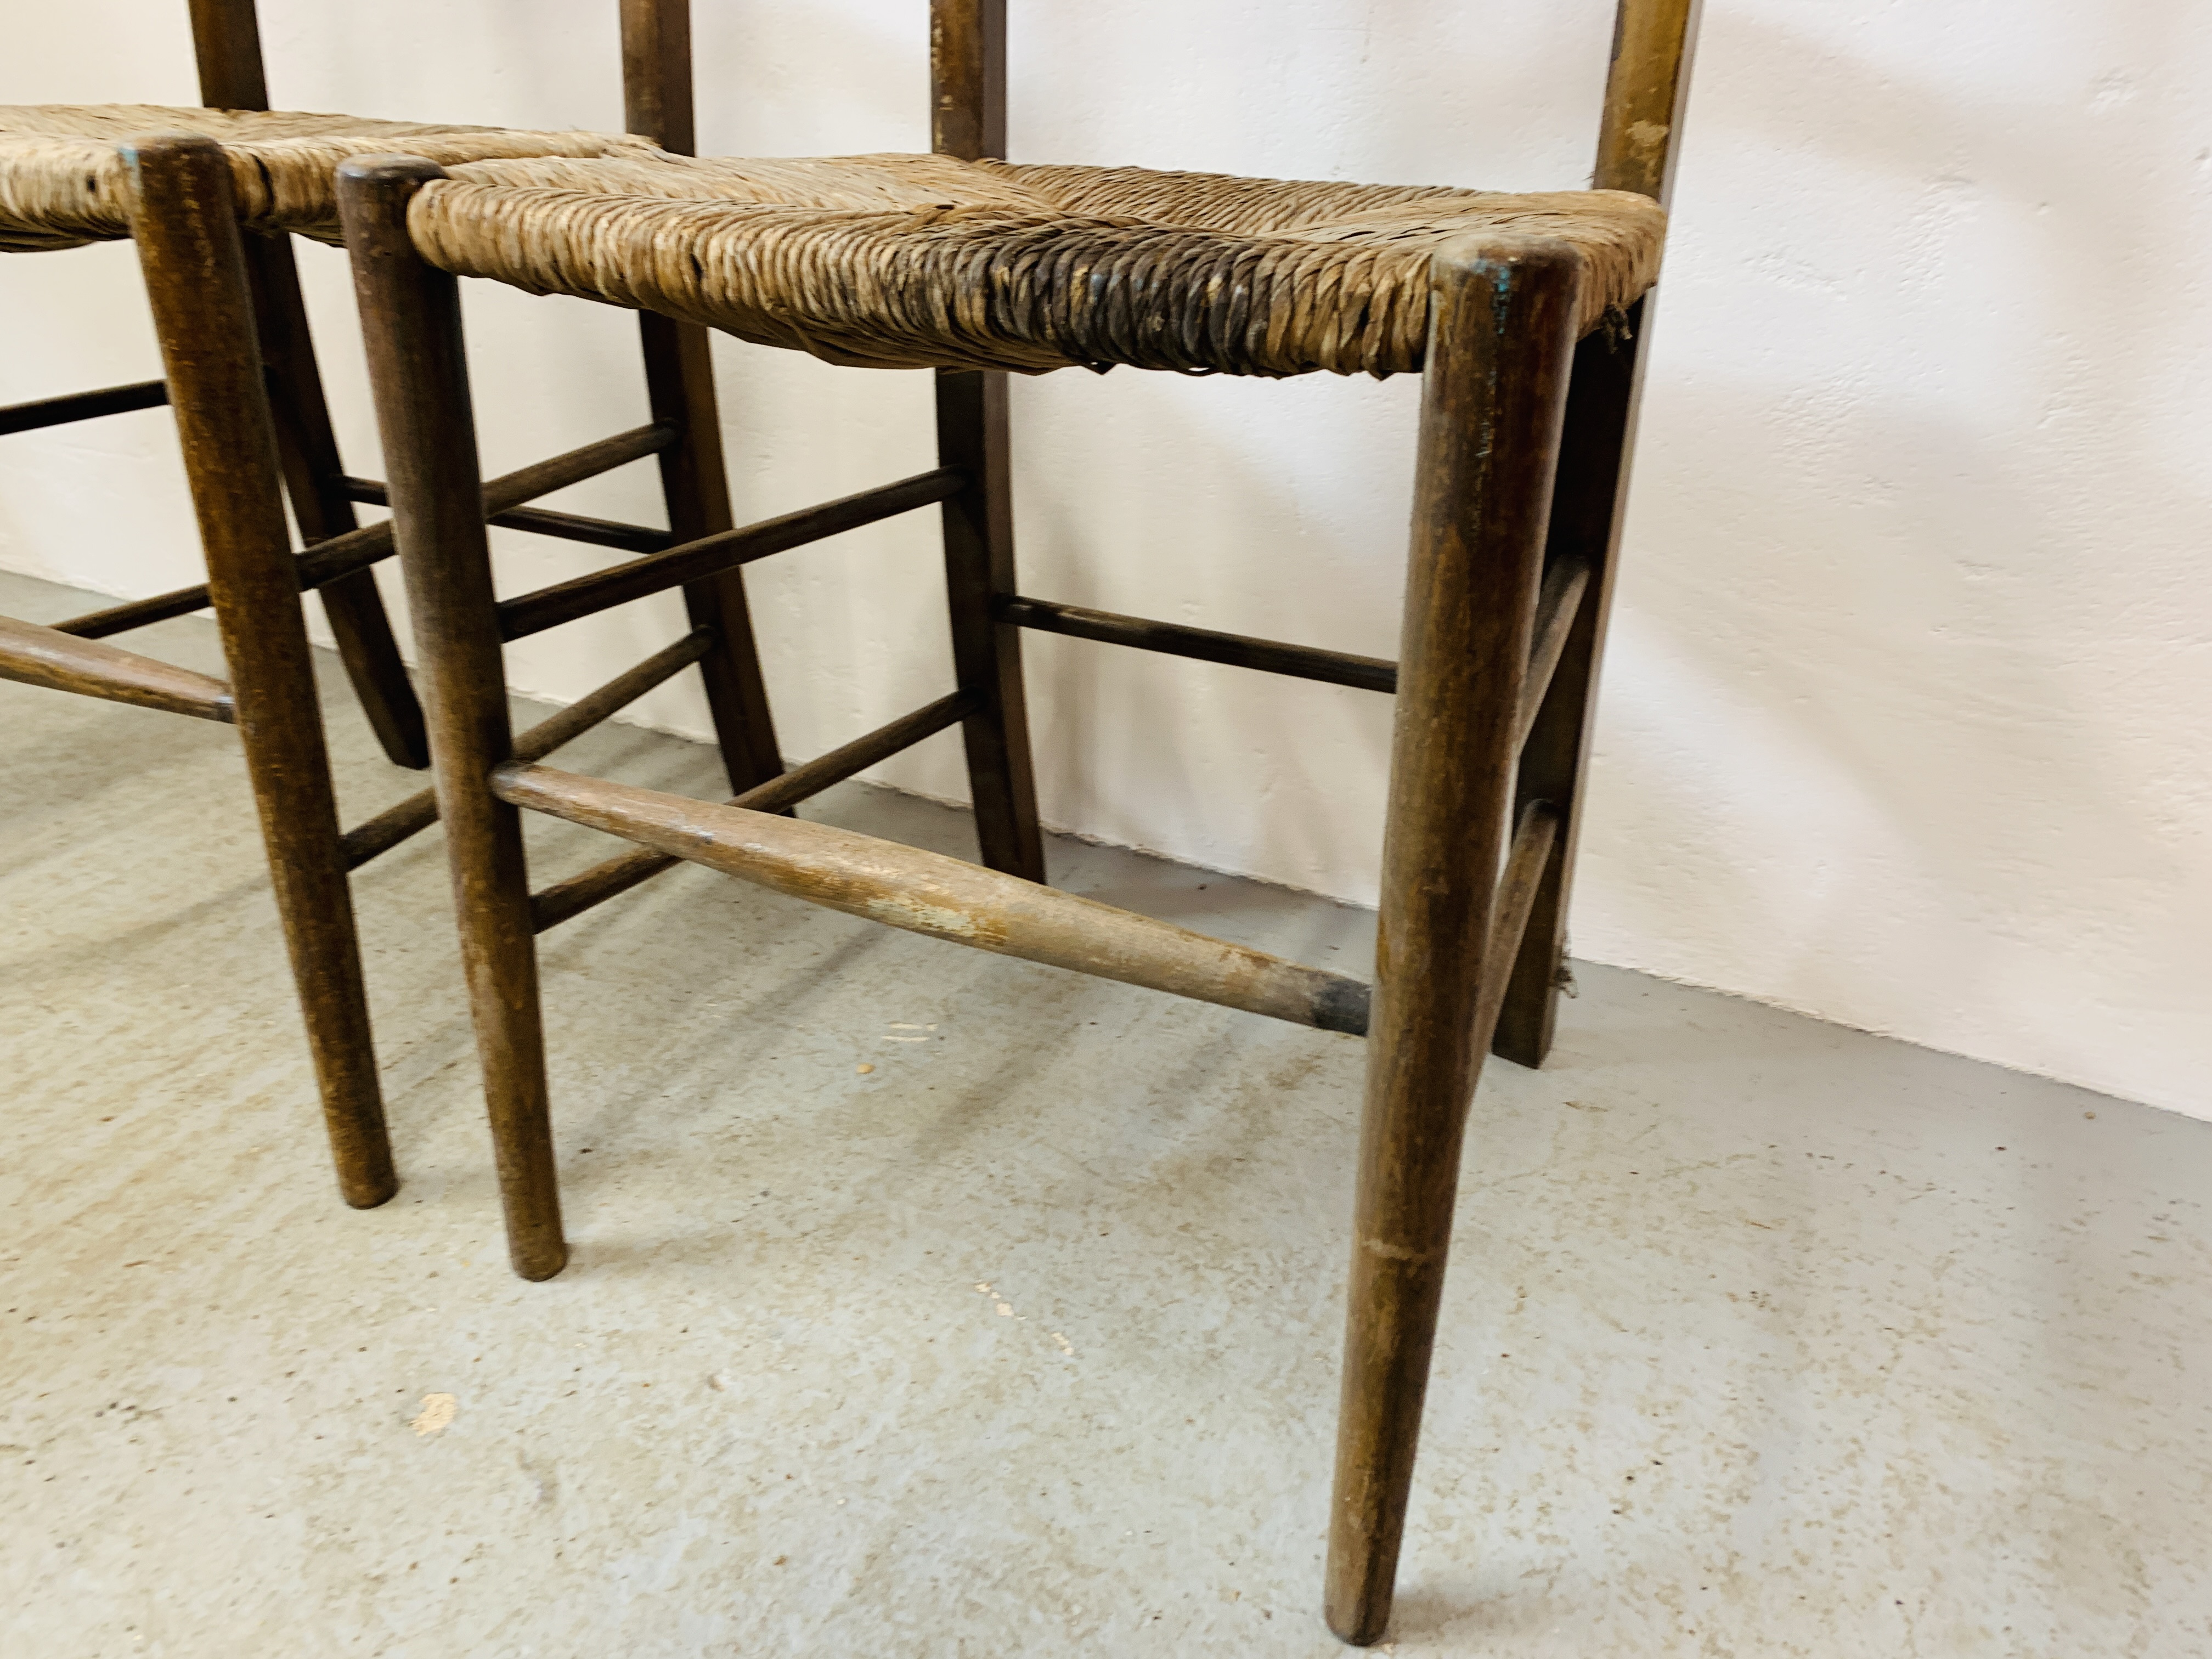 A PAIR OF ANTIQUE OAK LADDER BACK RUSH SEATED CHAIRS - Image 5 of 8